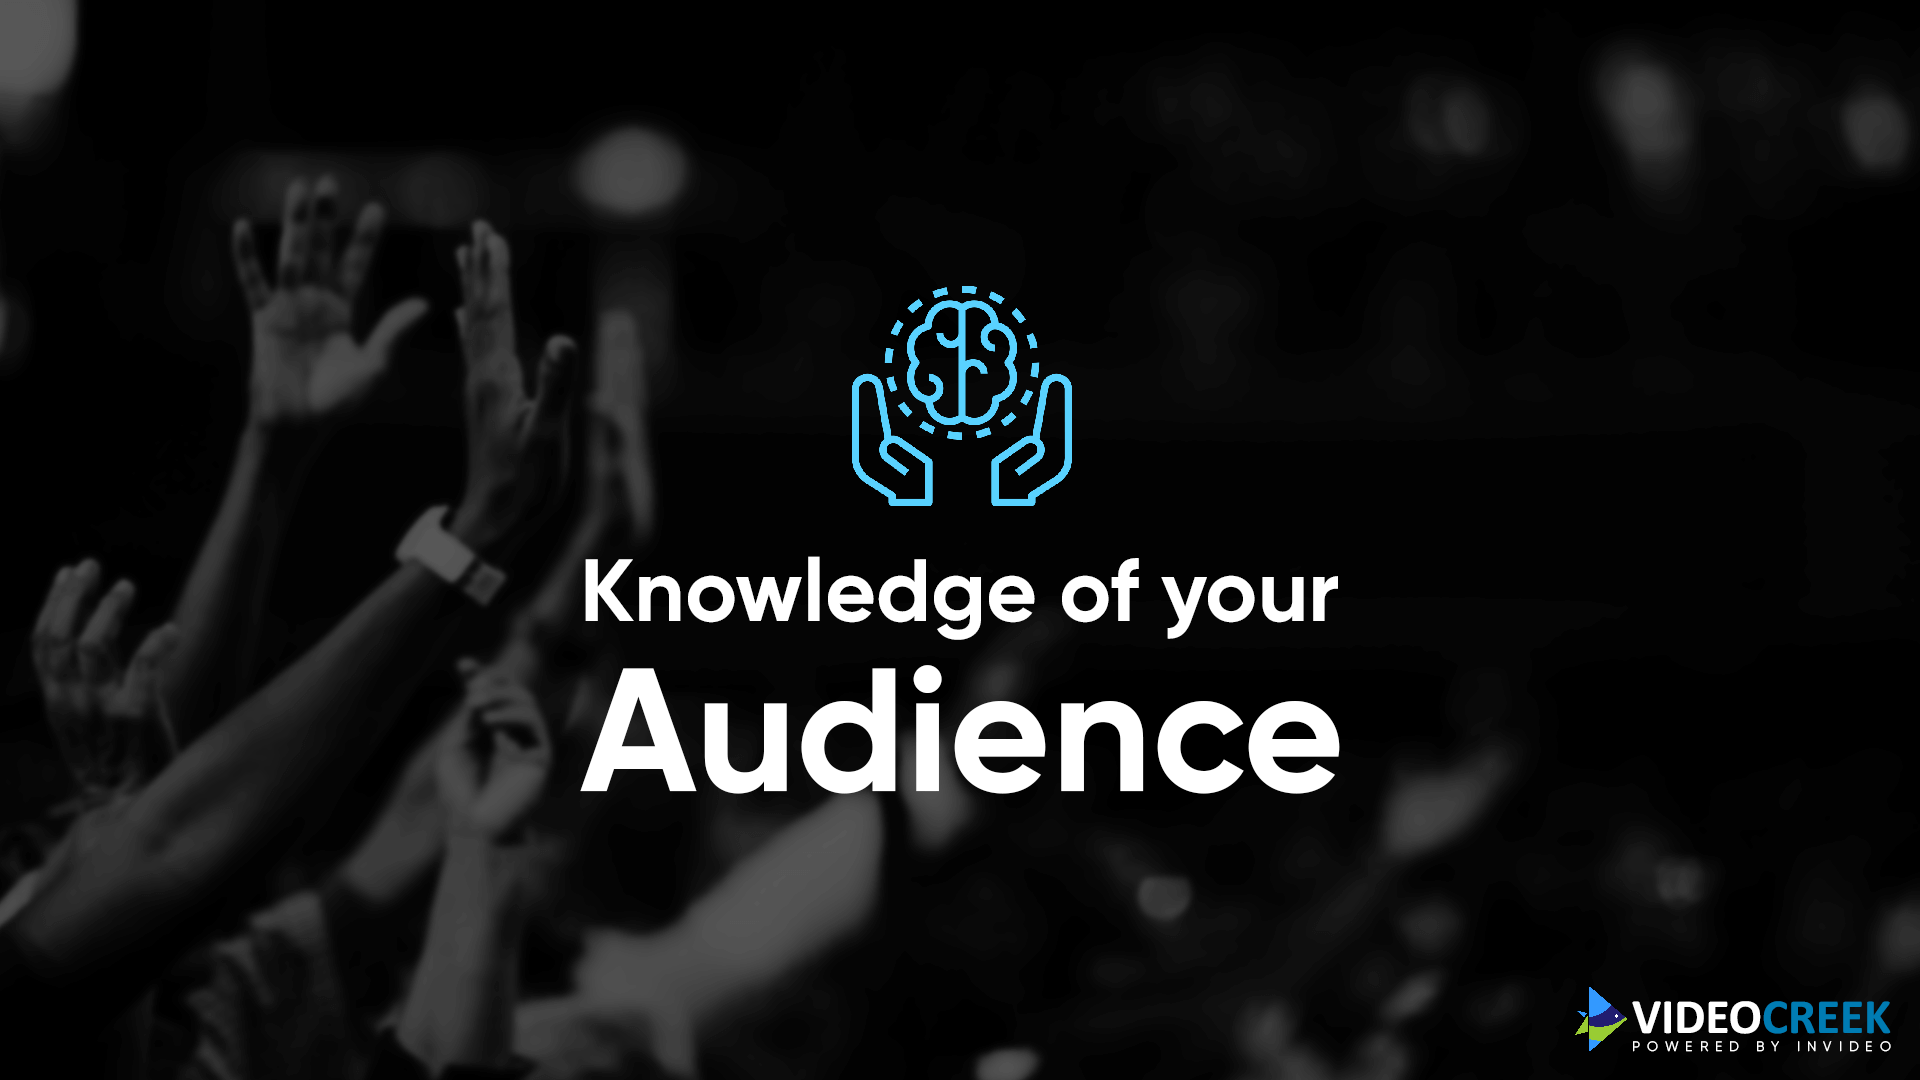 Knowledge of your audience